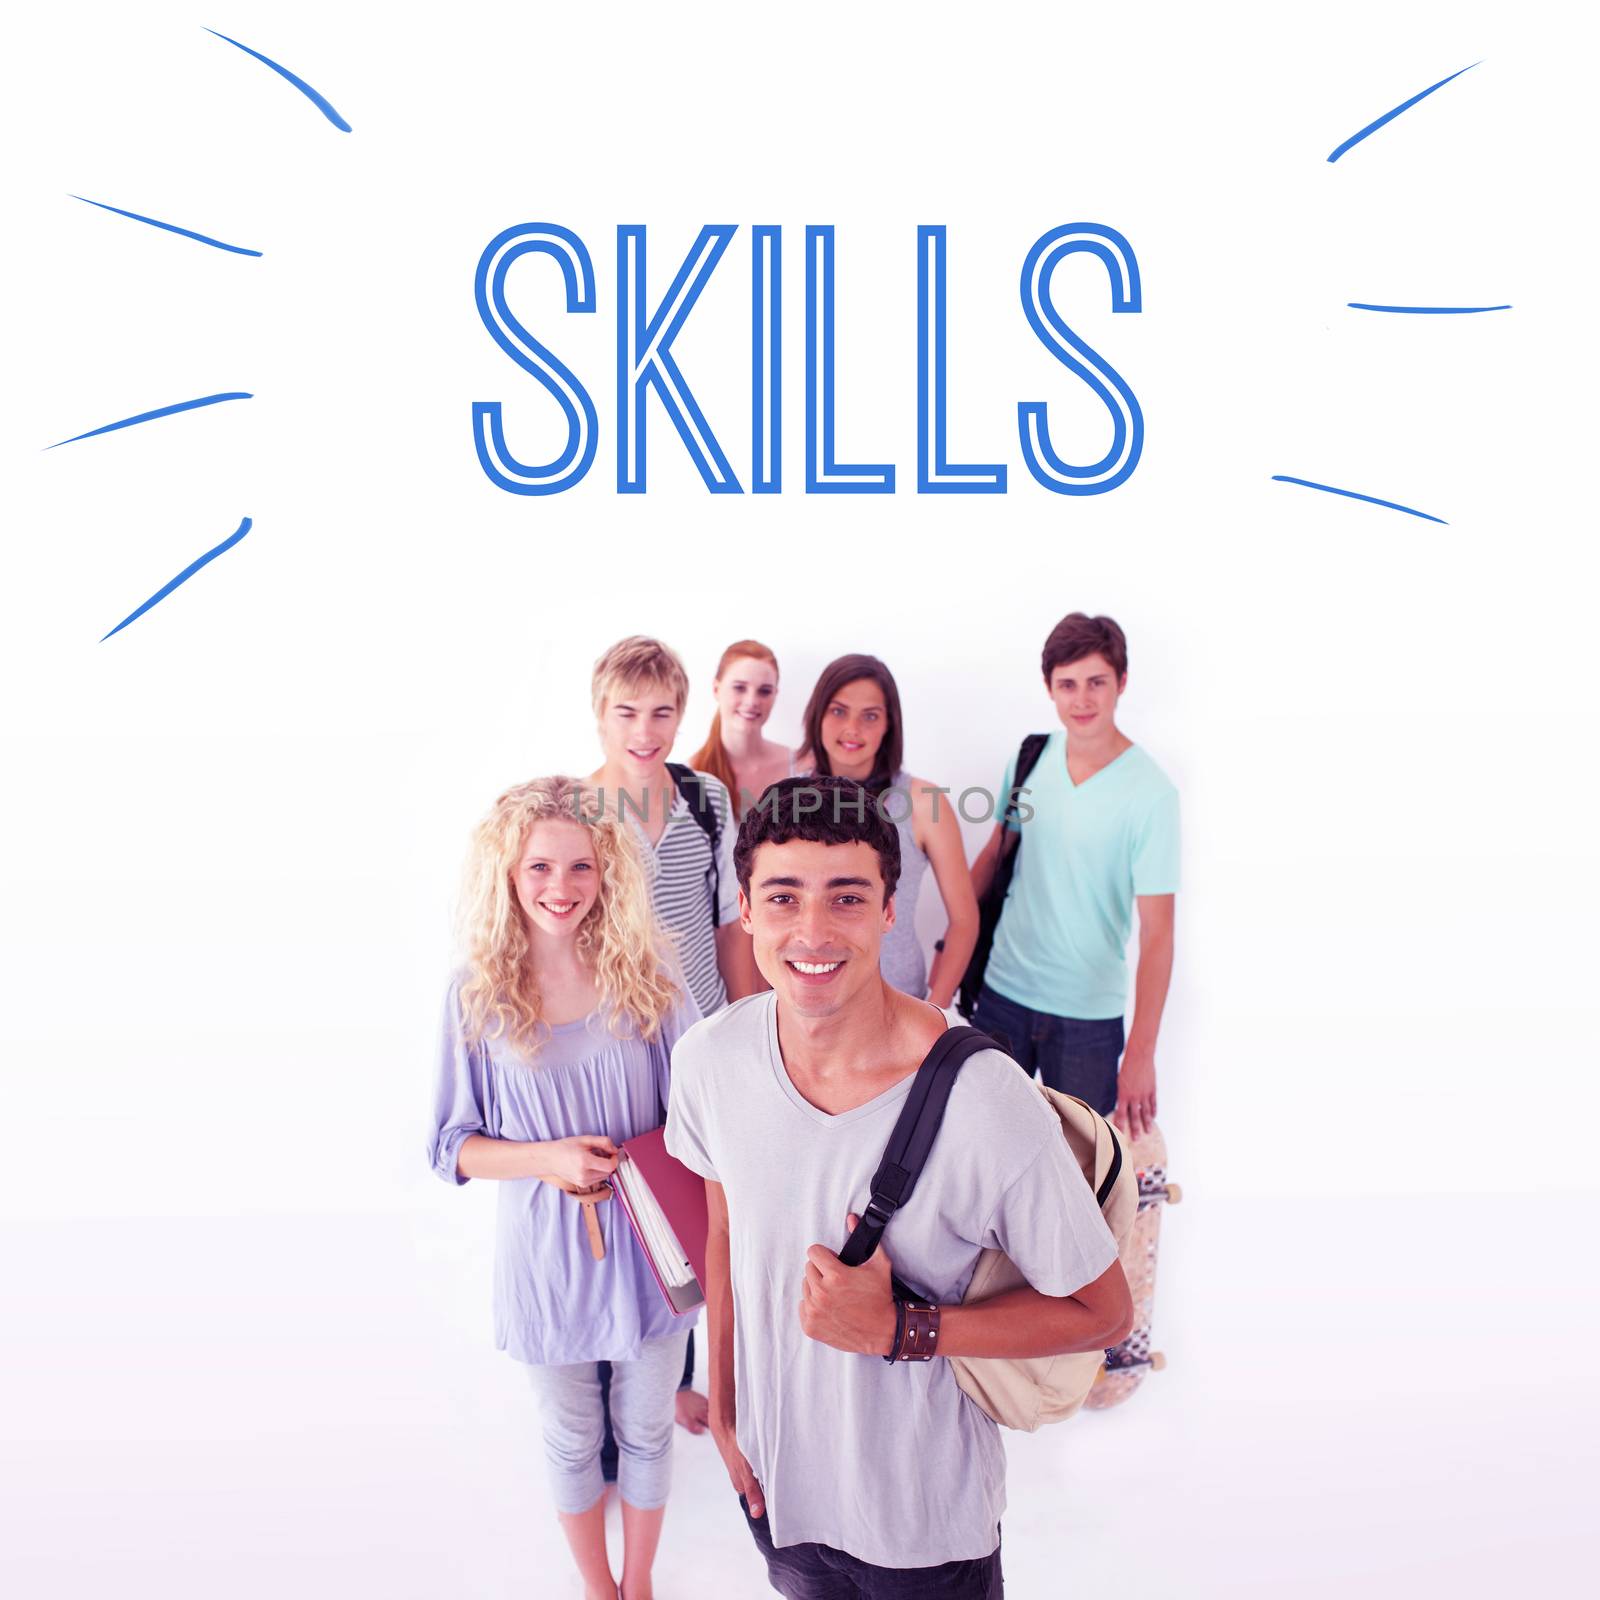 The word skills against smiling students